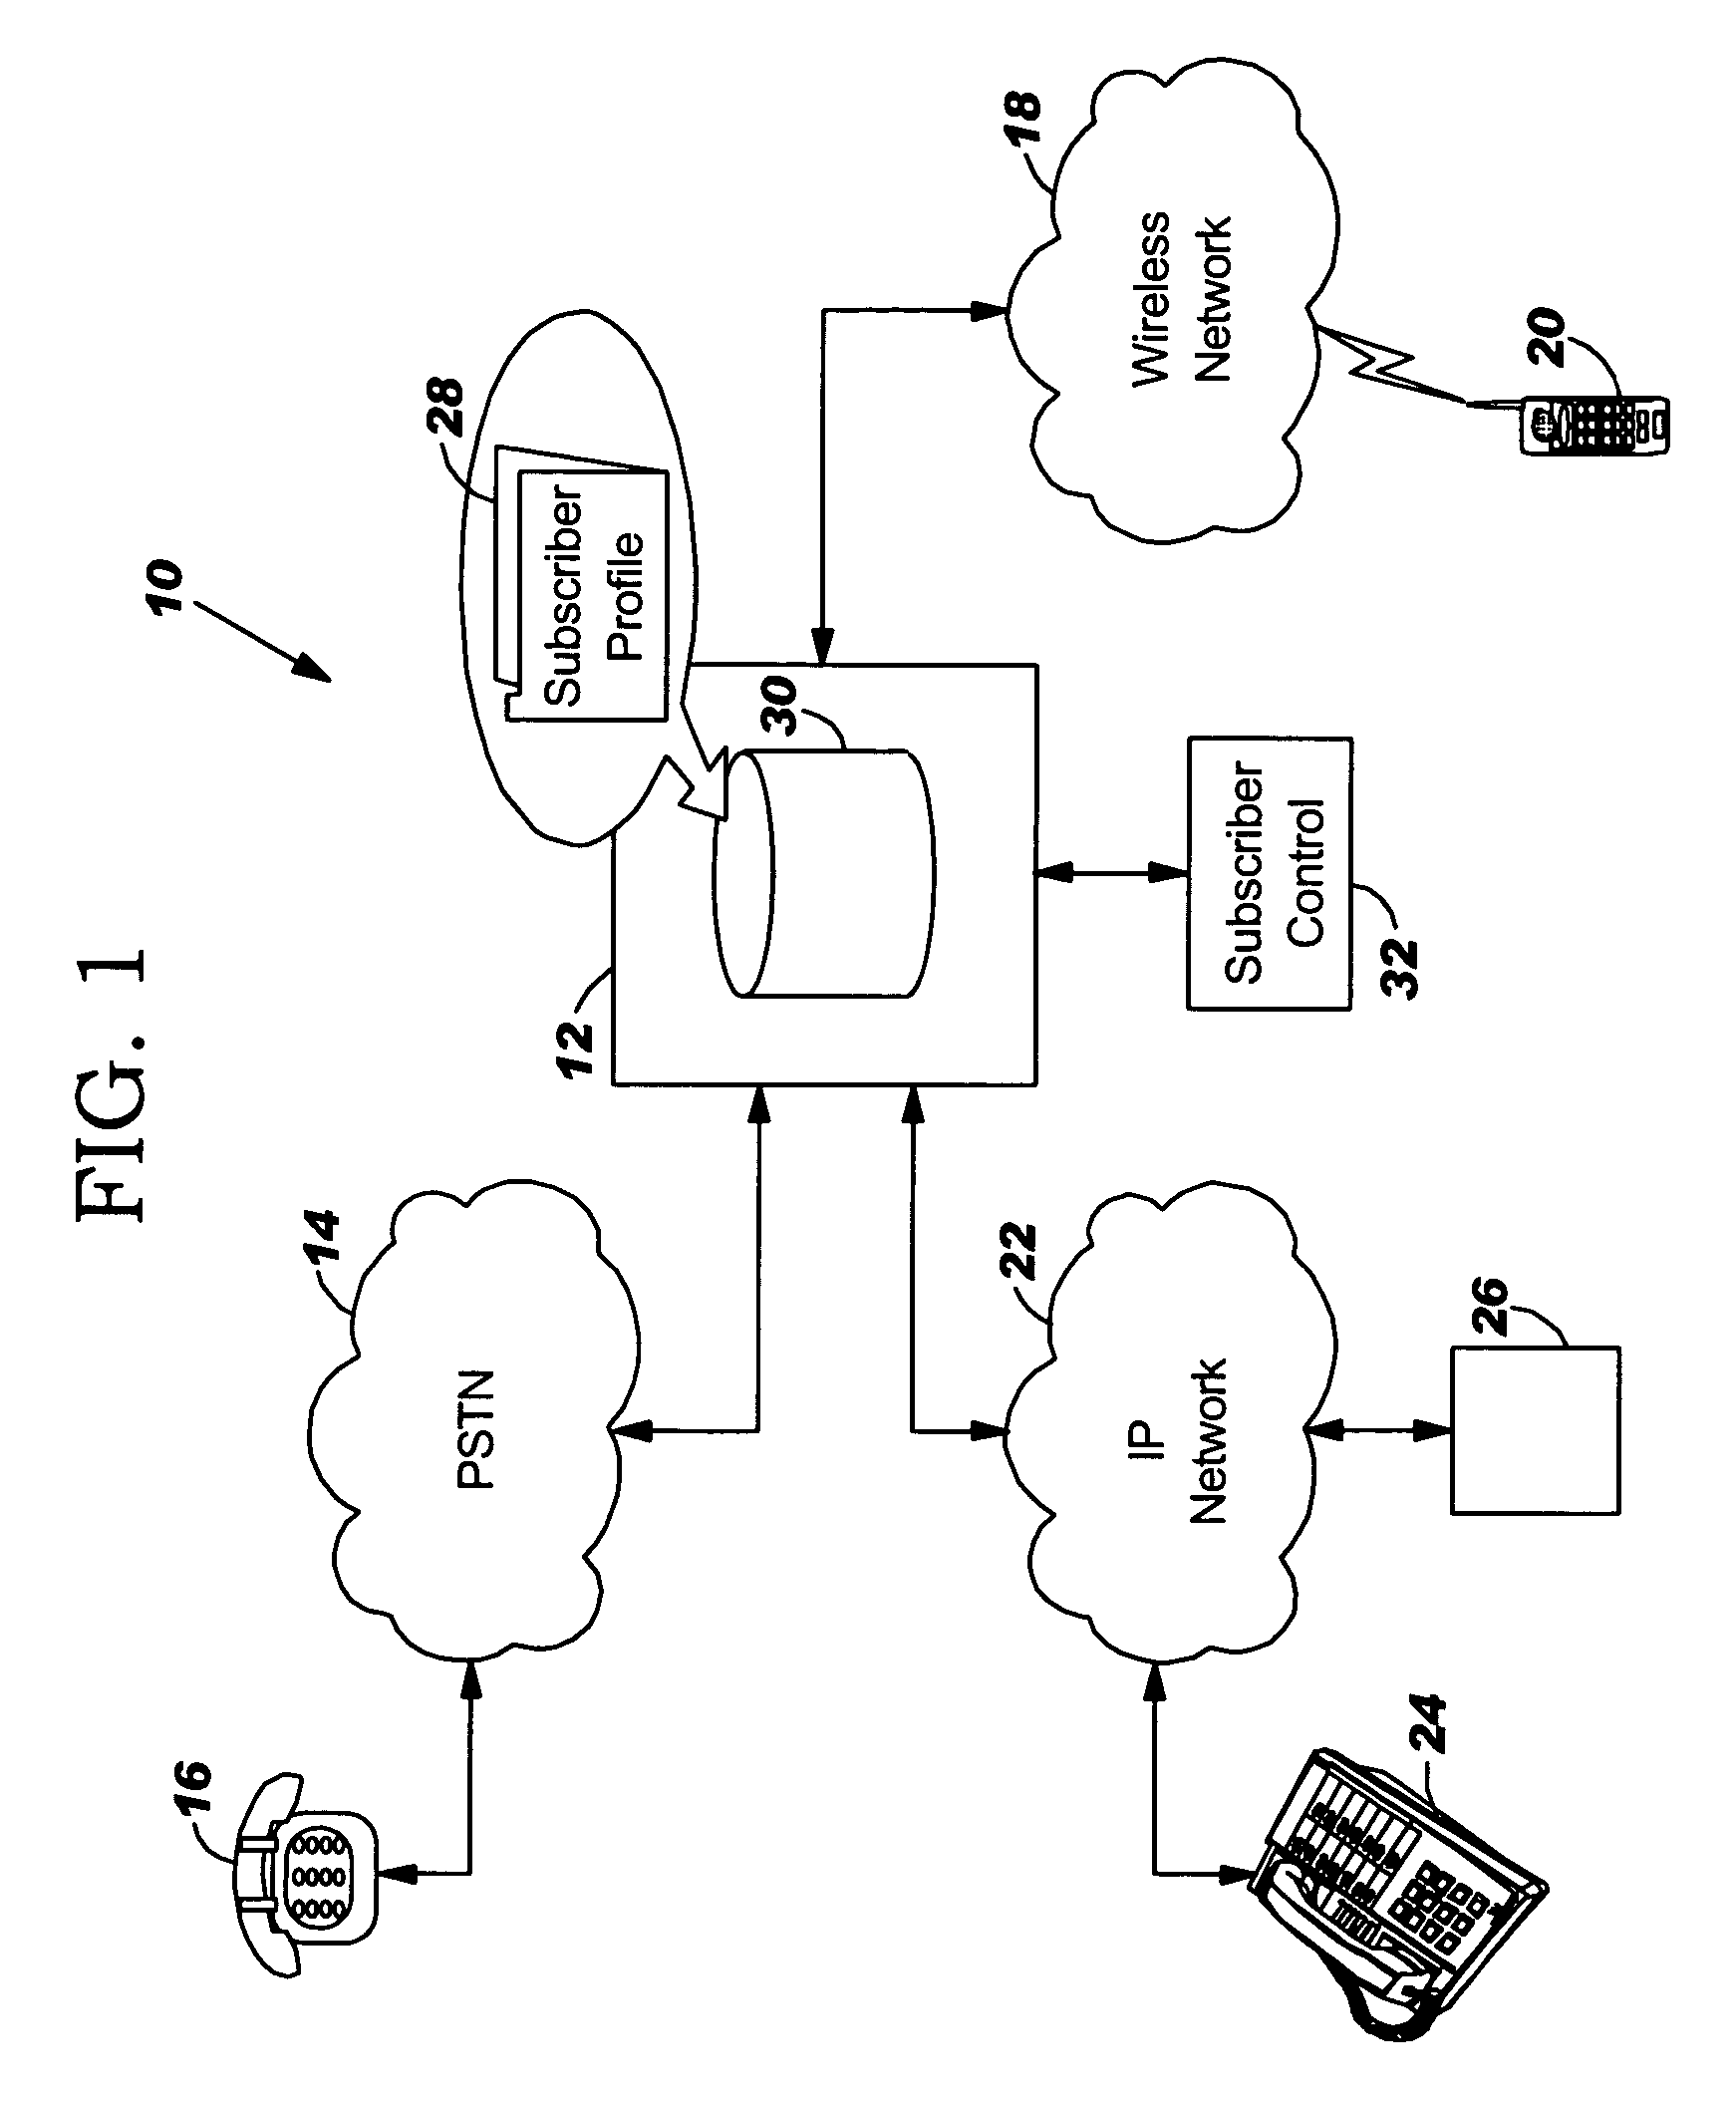 System and method for providing usage monitoring telephony services